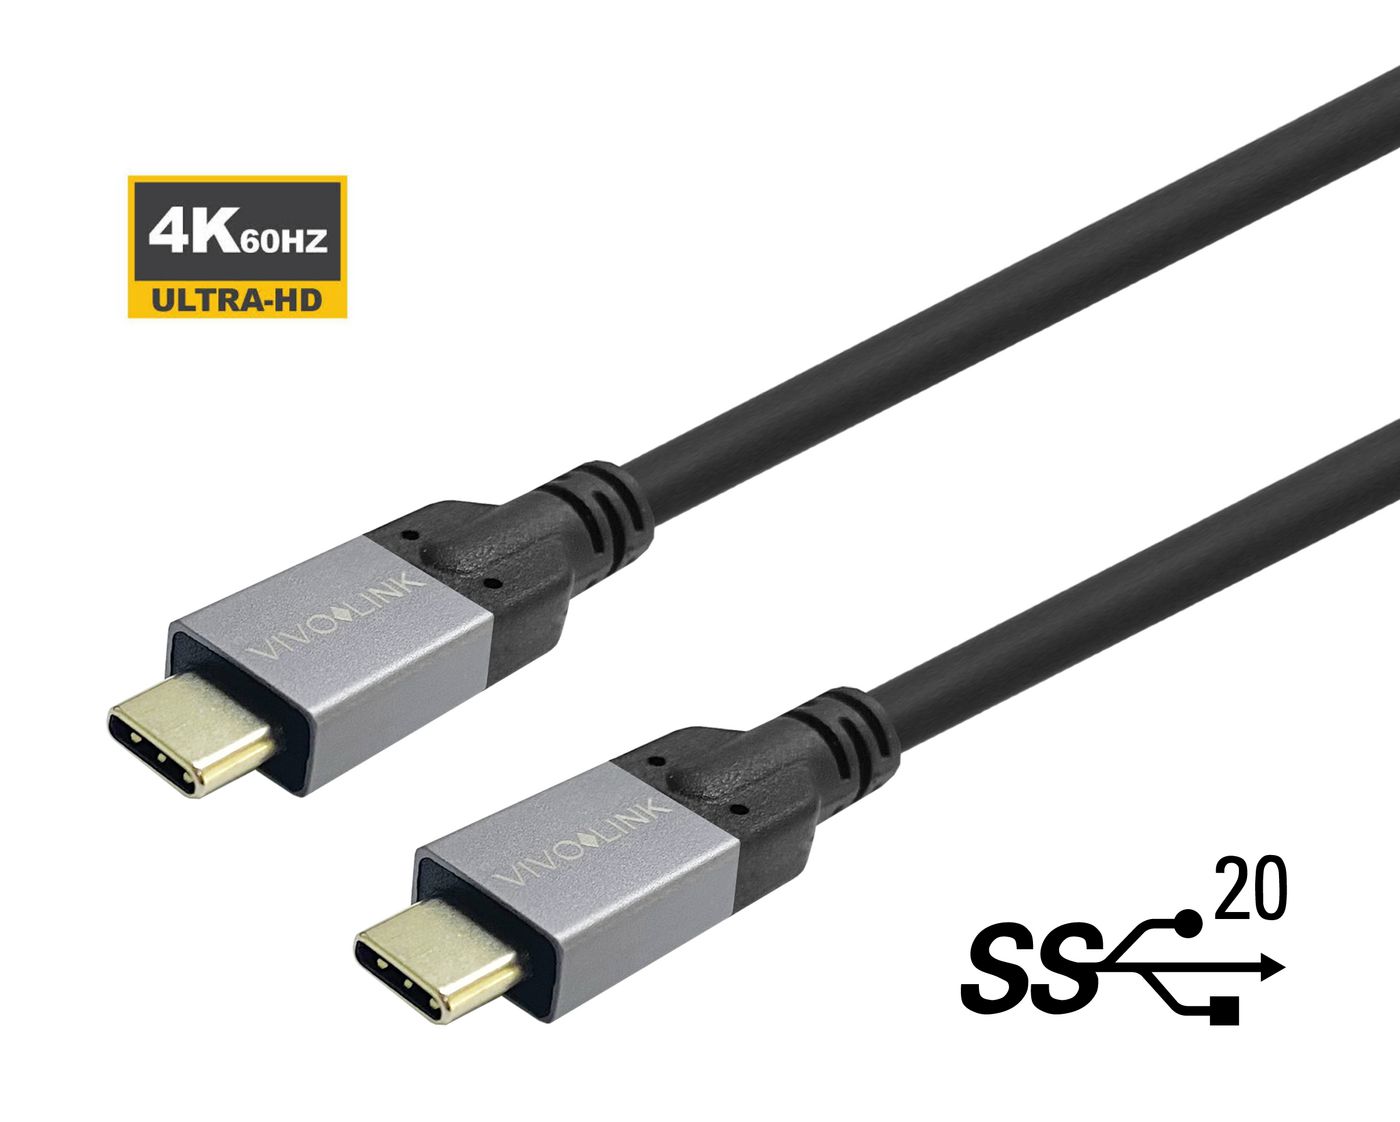 EET USB-C to Cable 1m Supports 20 Gbps data - Kabel - Digital/Daten (PROUSBCMM1)